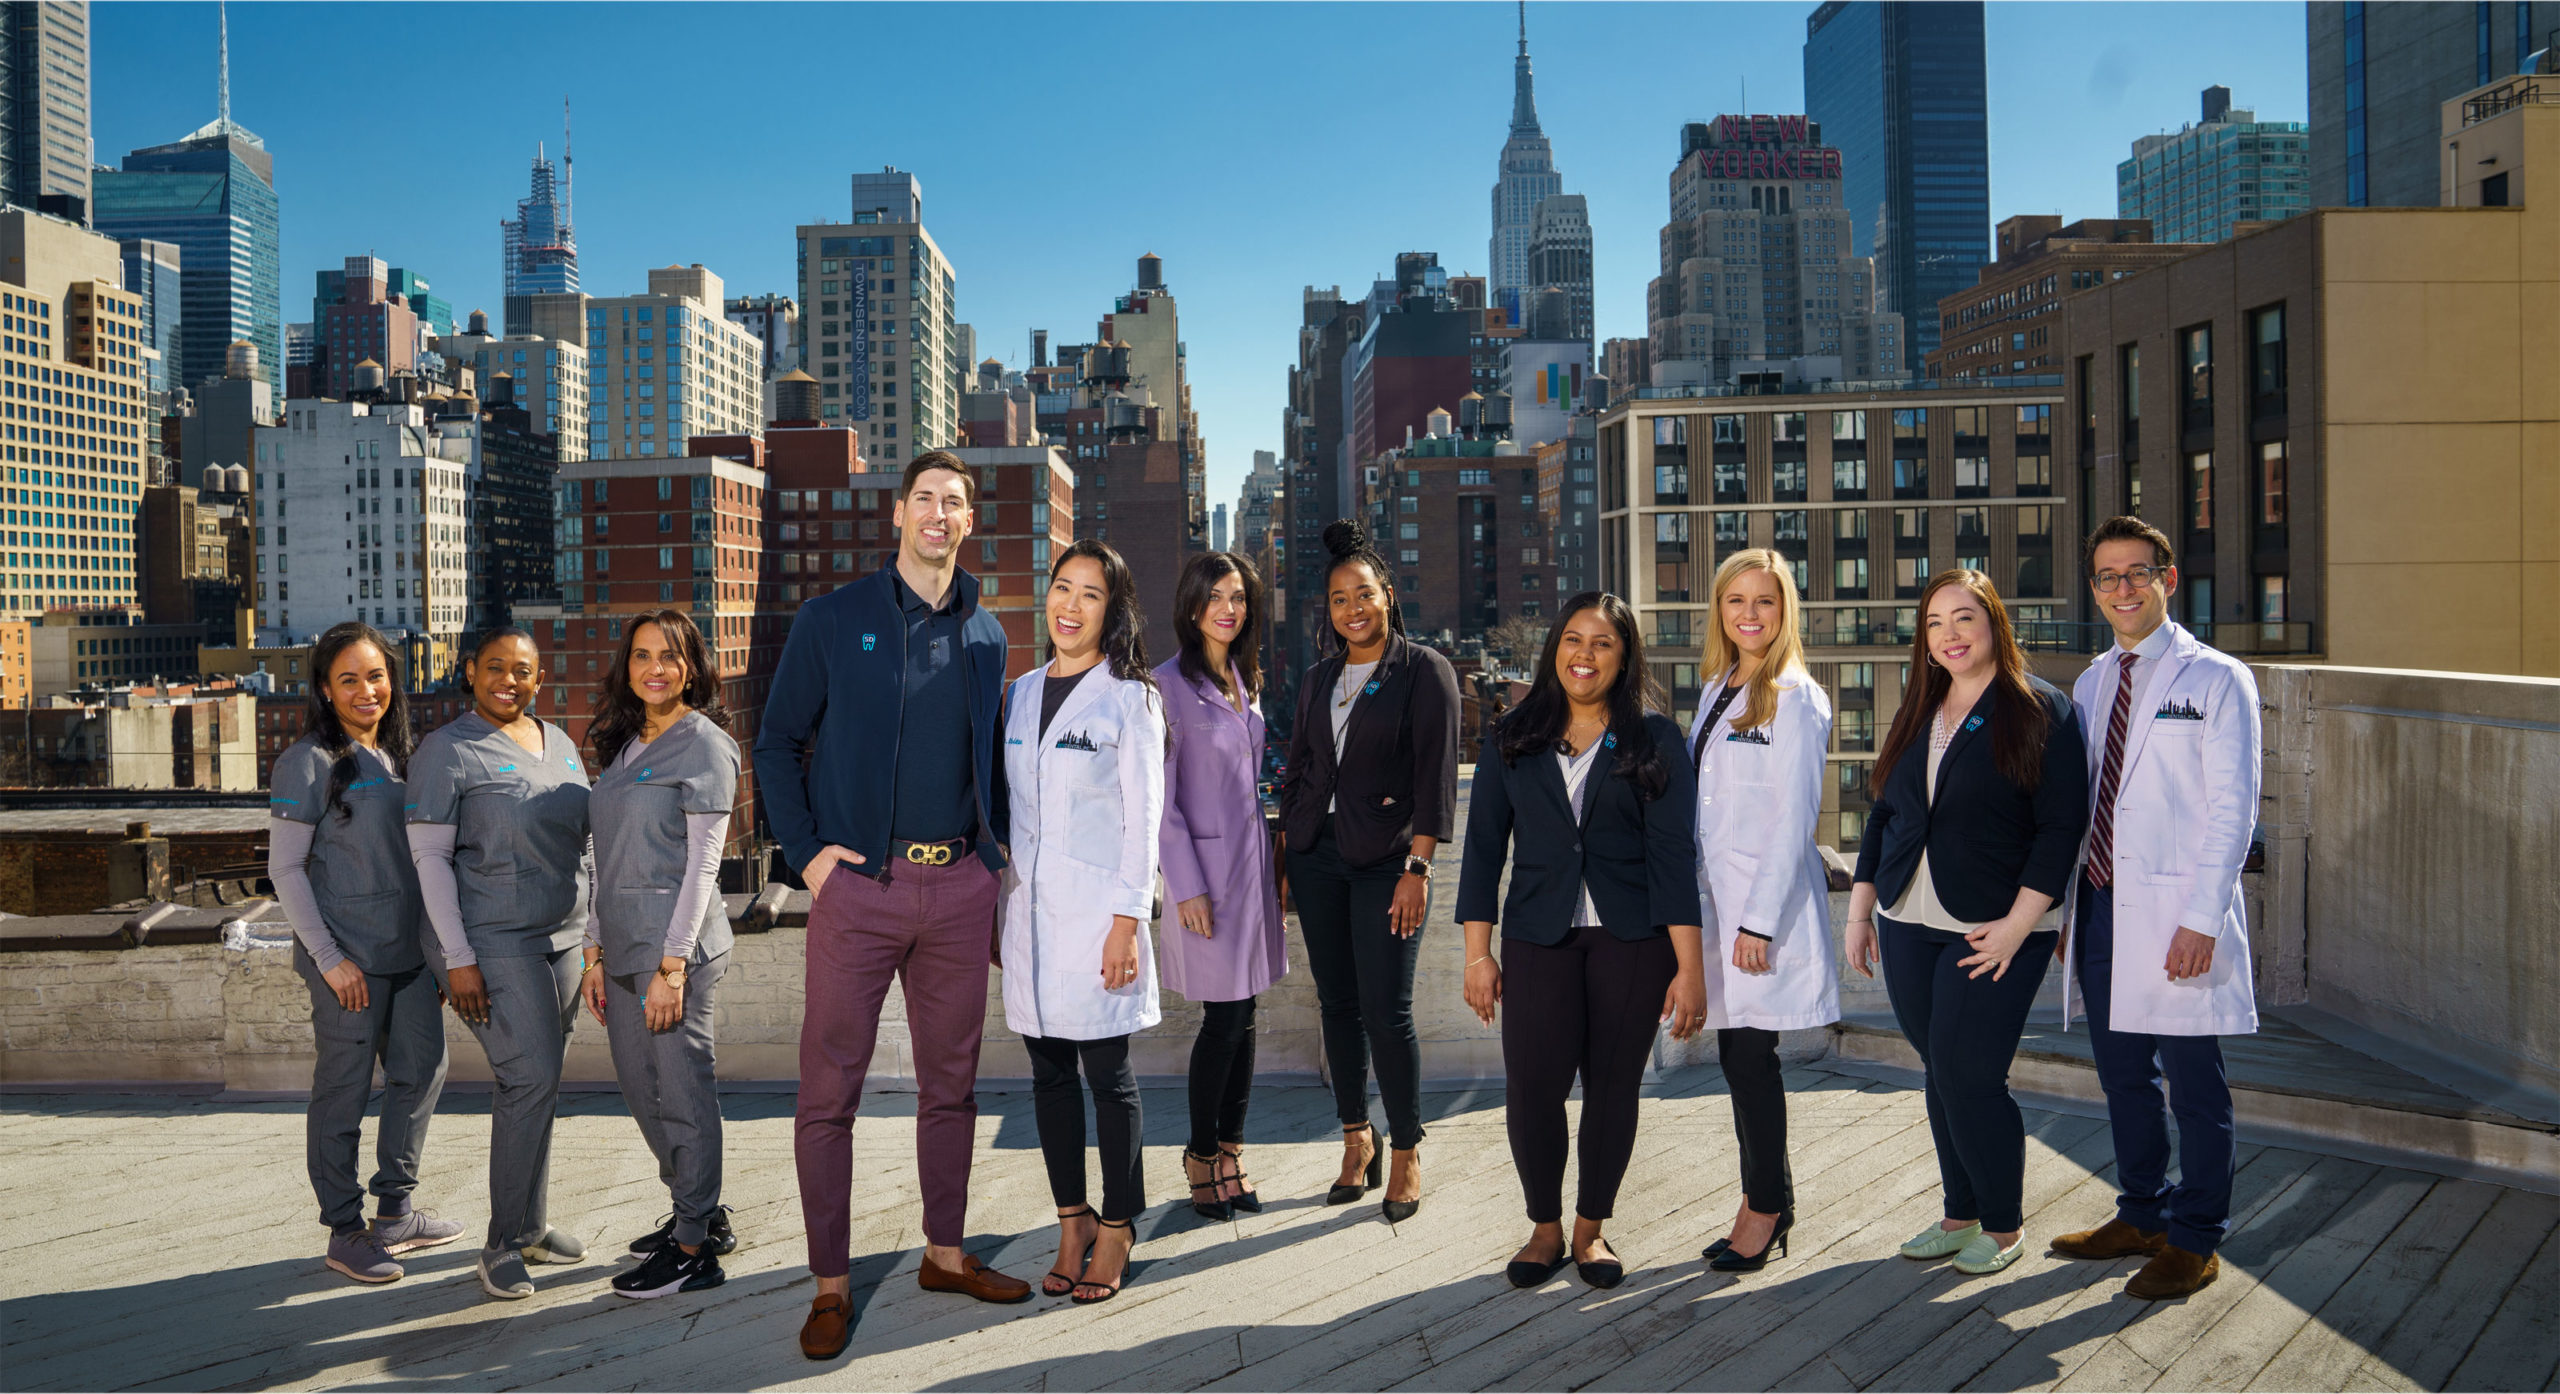 Team of SKY DENTAL NYC located in Fidi NYC posing for picture on the rooftop. Sunny day, blue sky, beautiful skyline in background.